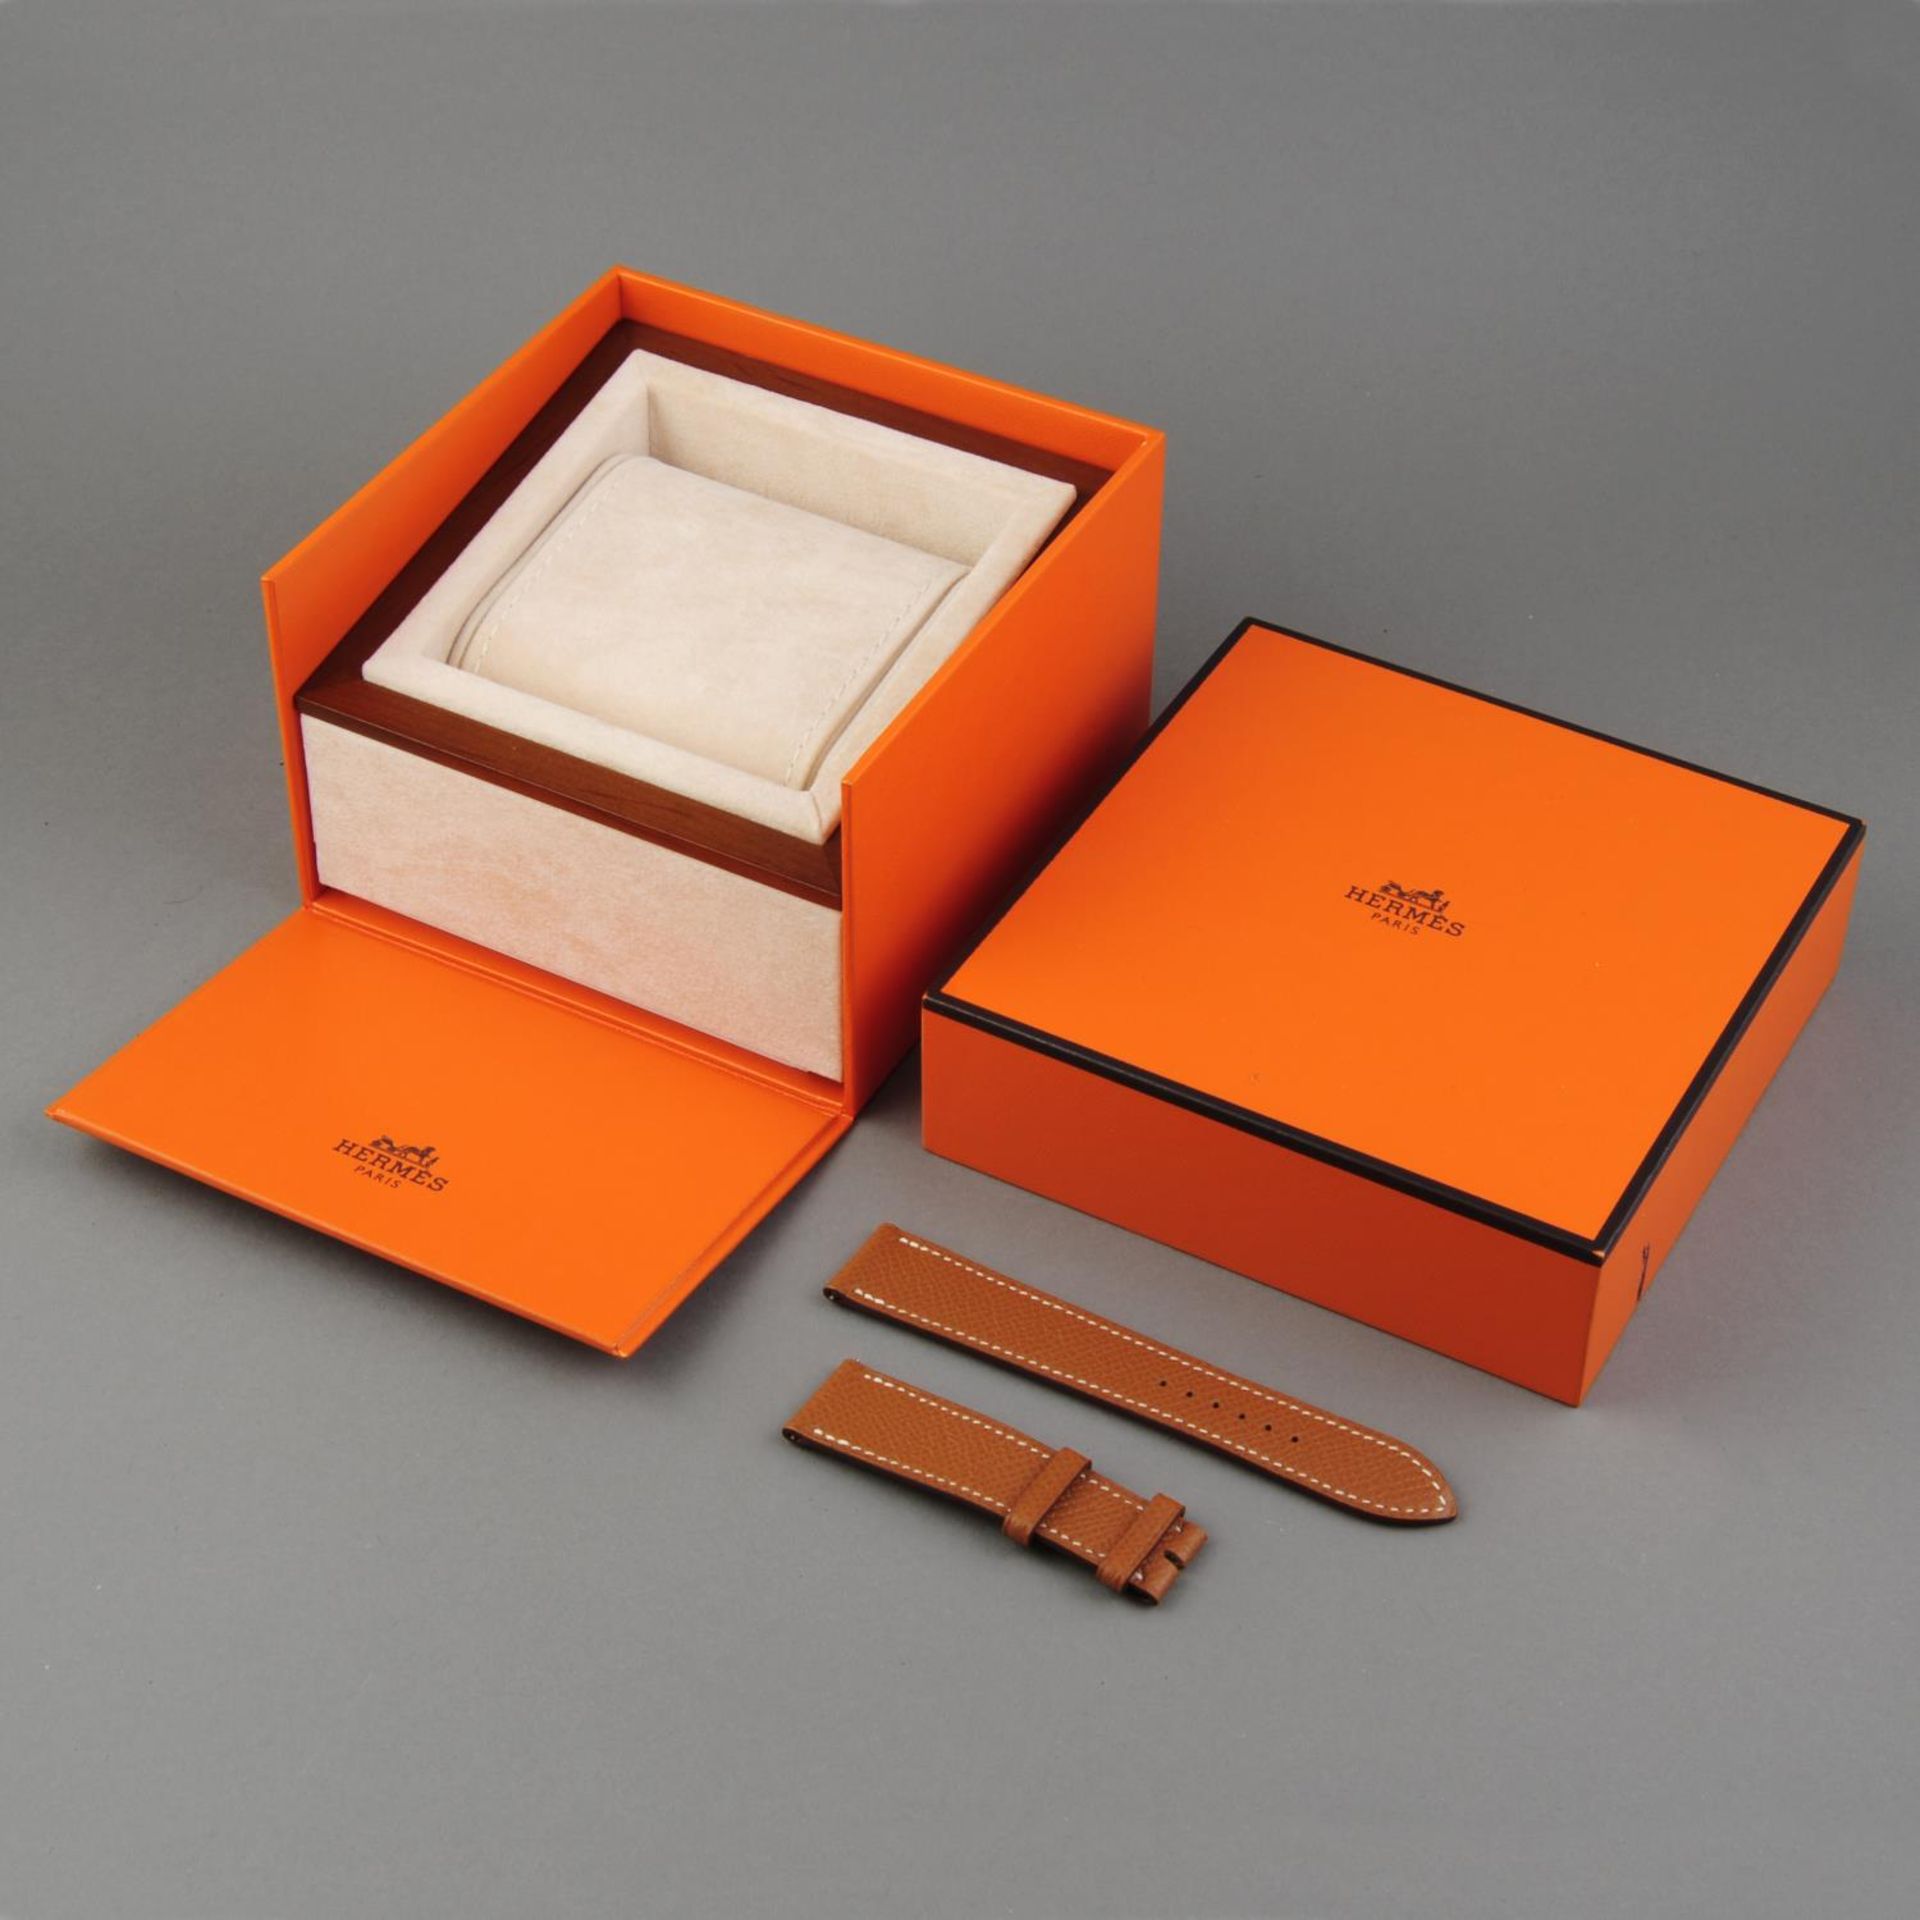 HERMÈS - a gentleman's H wrist watch. Gold plated case with stainless steel case back. Reference - Image 7 of 7